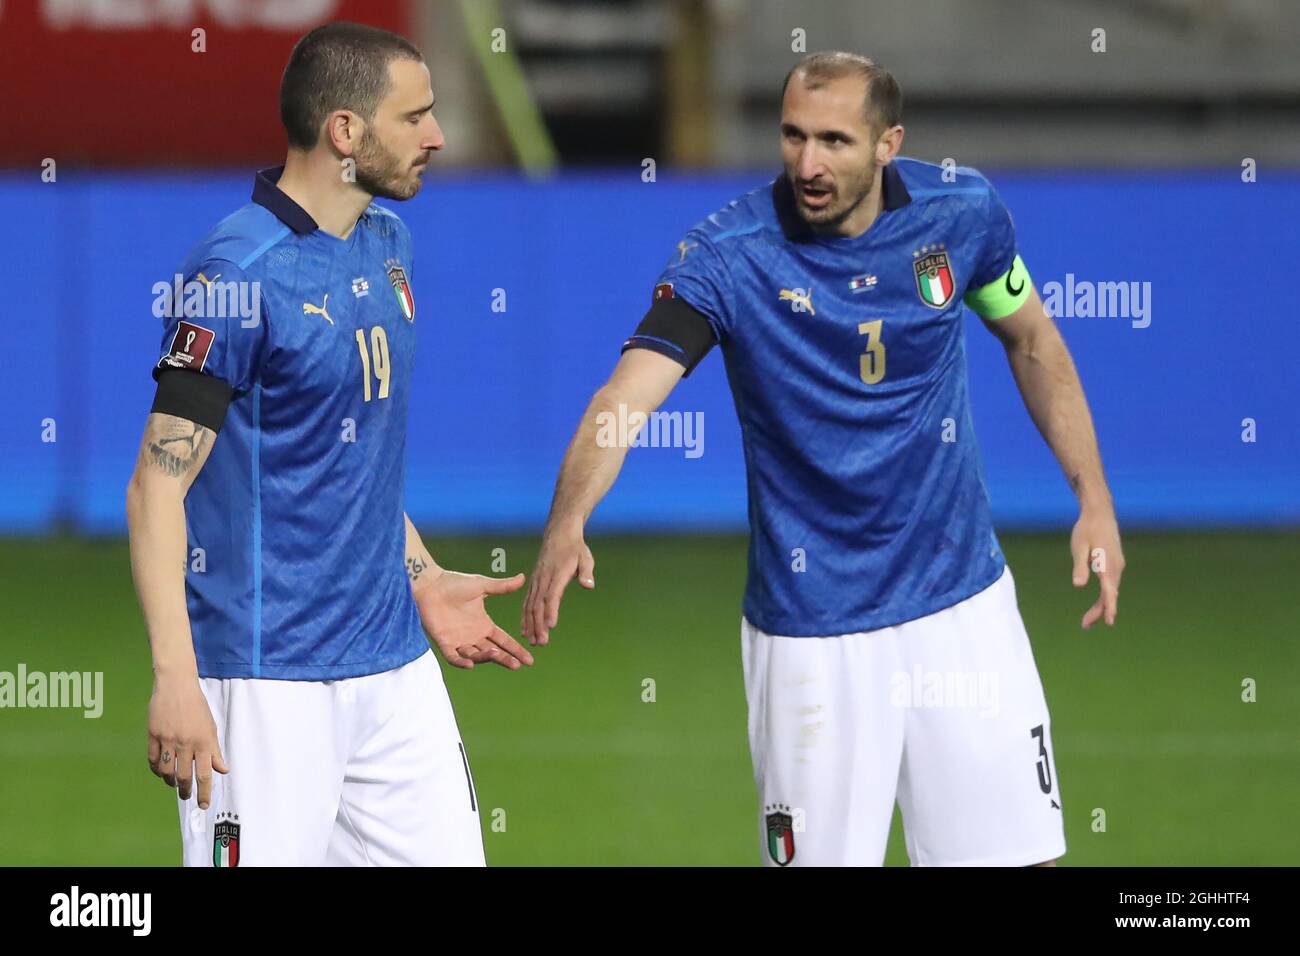 Leonardo Bonucci of Italy and his Juventus team mate Giorgio Chiellini during the Fifa World Cup qualifiers match at Stadio Ennio Tardini, Parma. Picture date: 25th March 2021. Picture credit should read: Jonathan Moscrop/Sportimage via PA Images Stock Photo